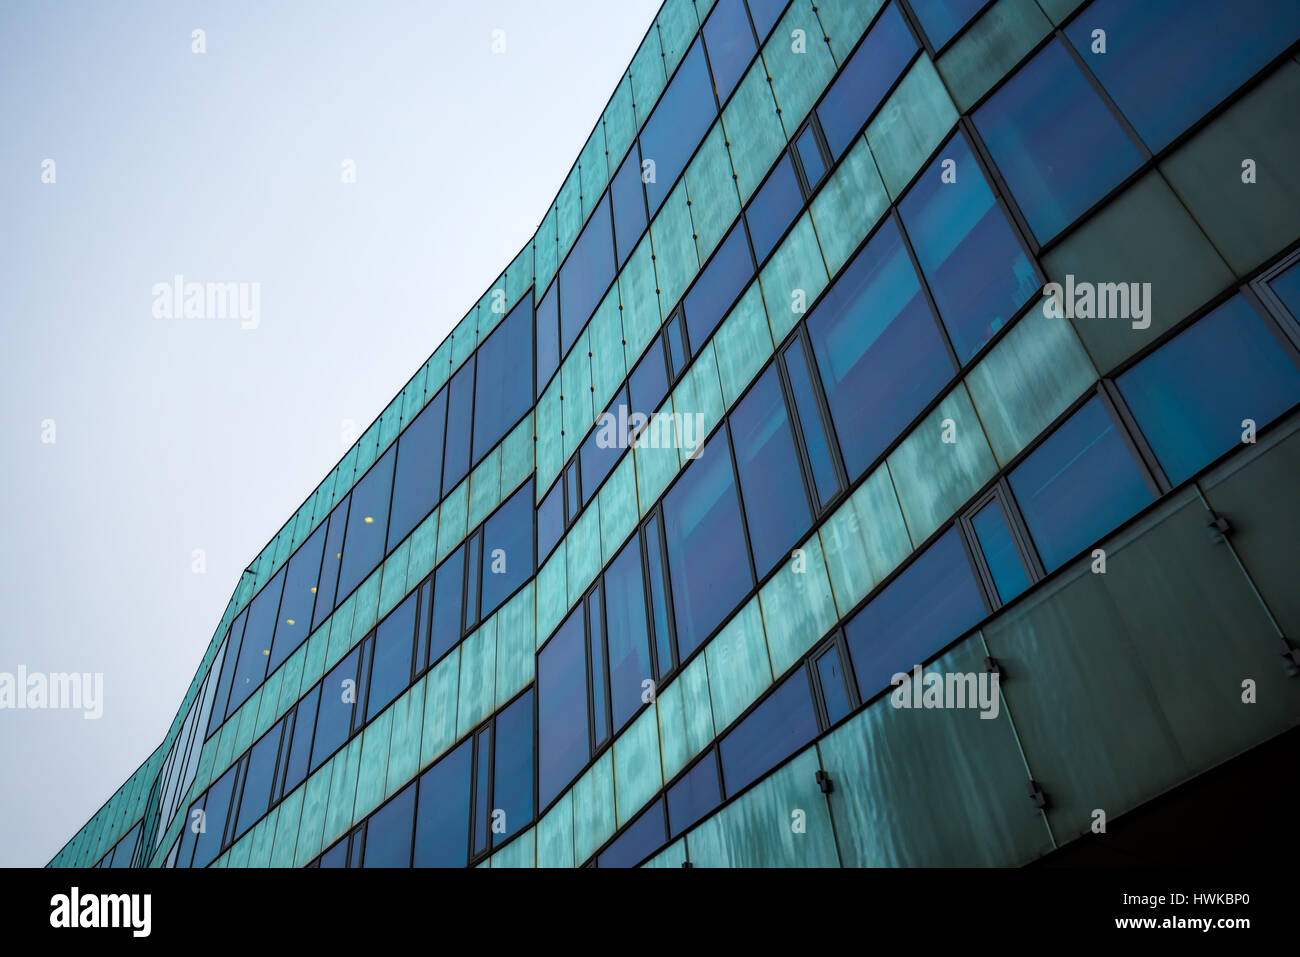 MALMO, SWEDEN - MARCH 09, 2017: Malmo University, Faculty of Education and Society. Orkanen Library holds extensive collection of literature. Stock Photo